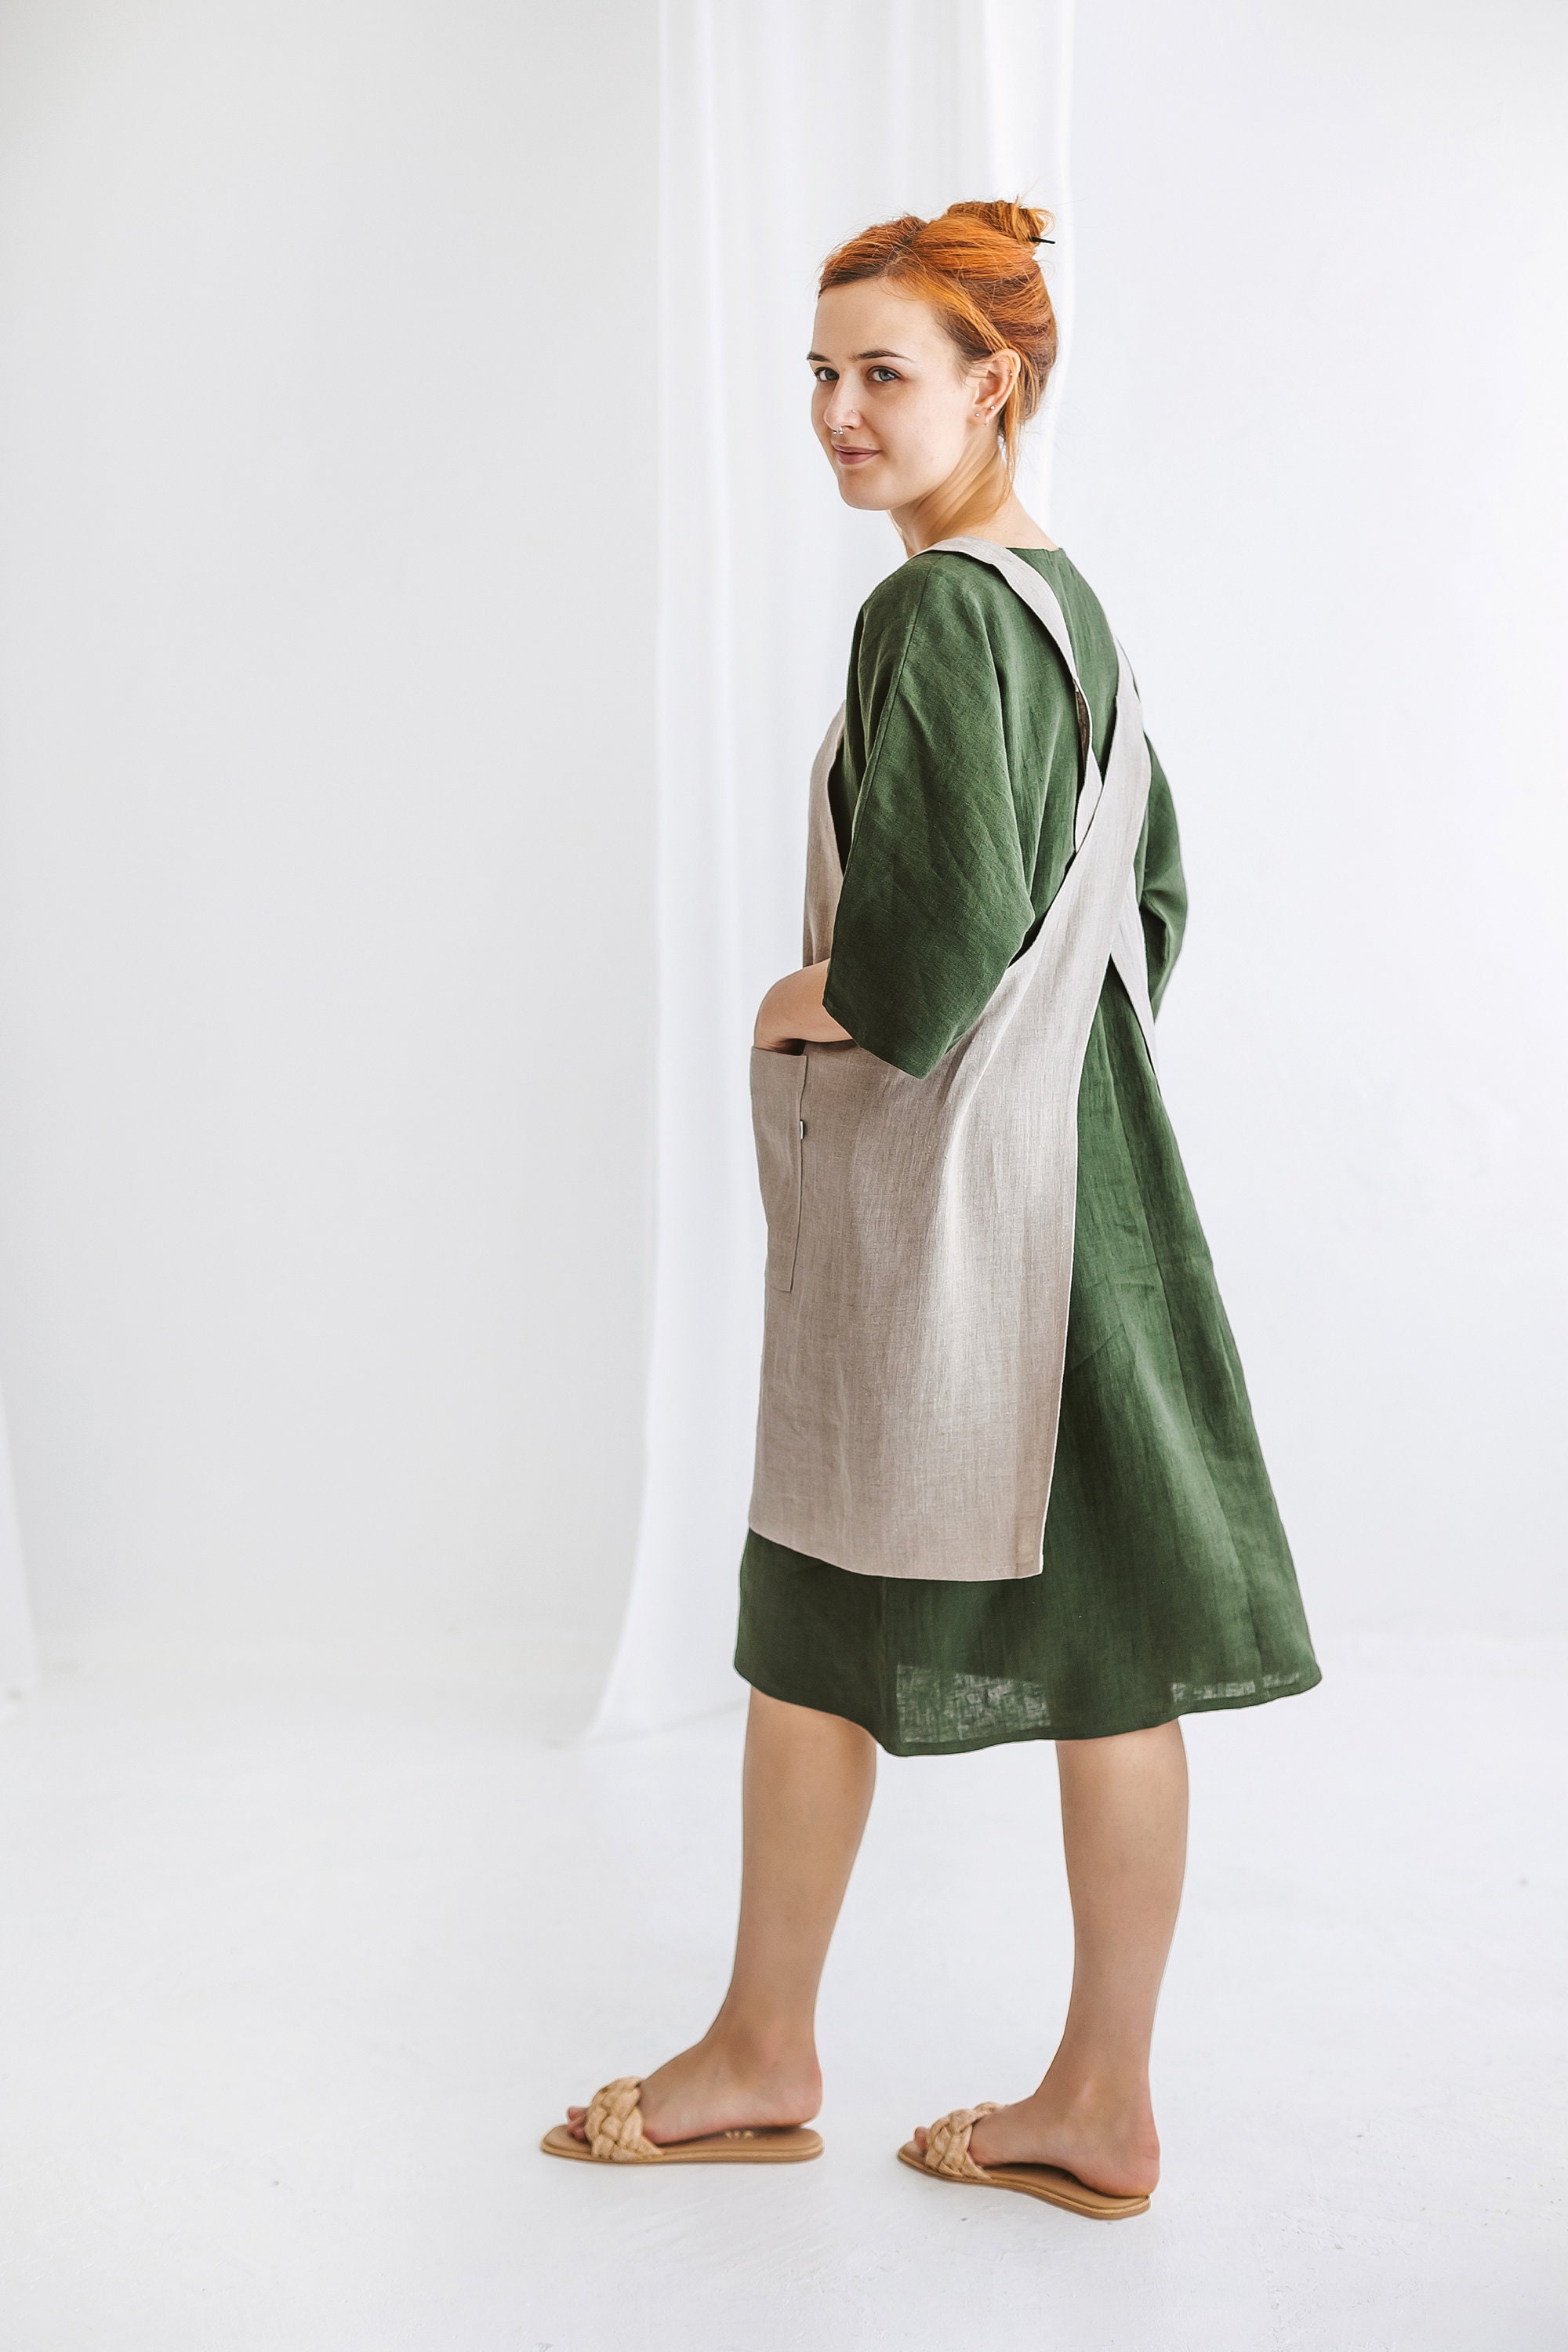 The Best Cross-Back Linen Aprons You Can Buy — 2020